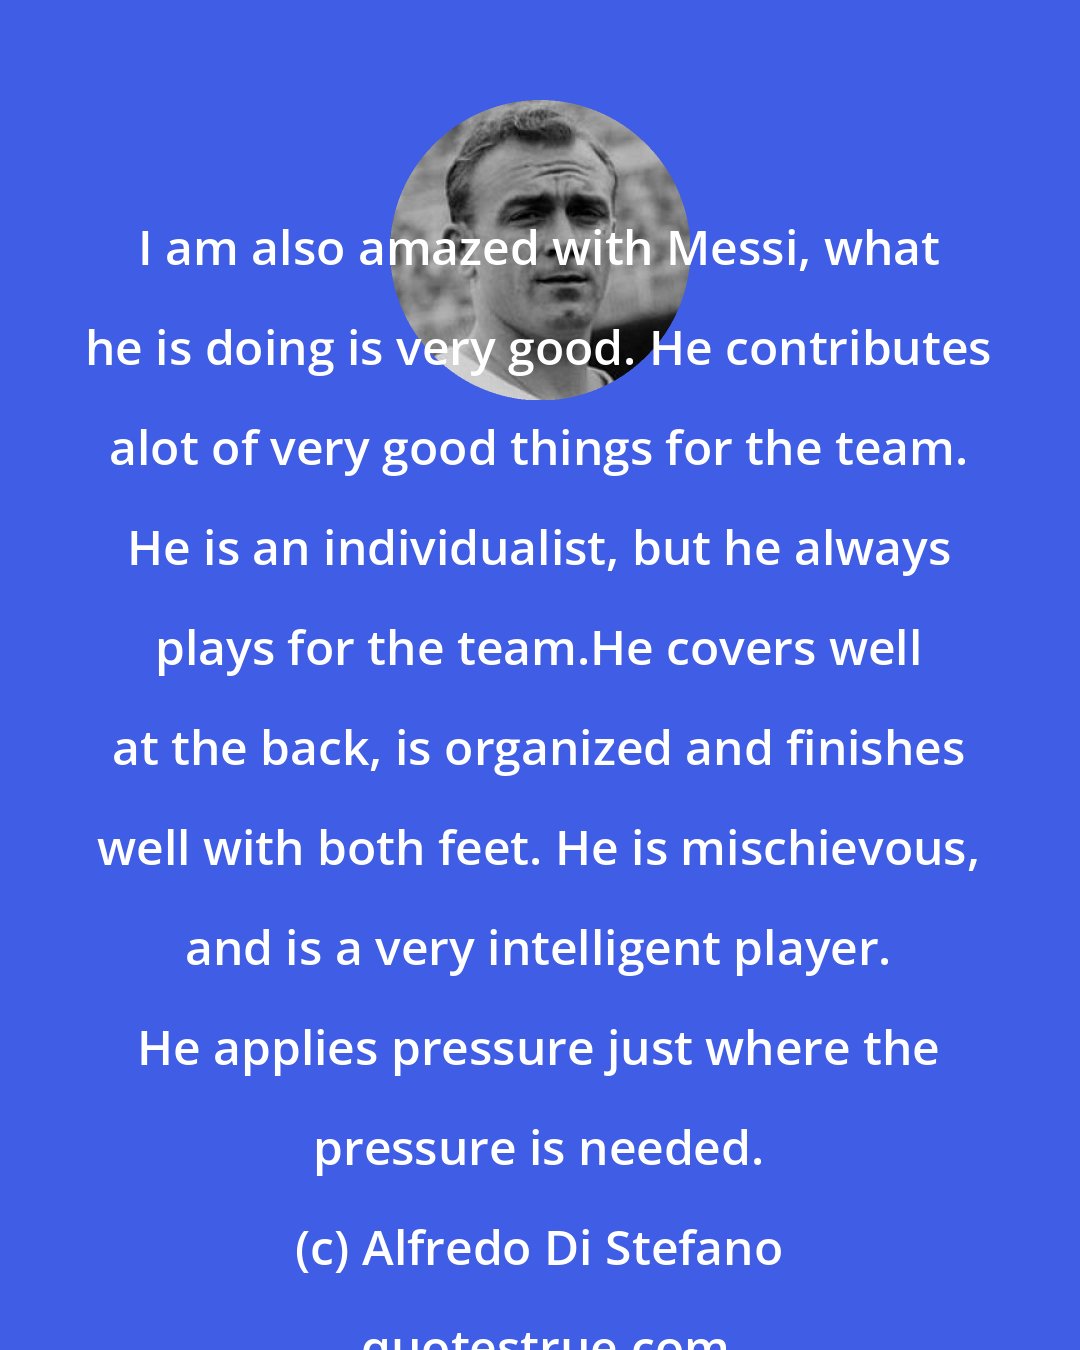 Alfredo Di Stefano: I am also amazed with Messi, what he is doing is very good. He contributes alot of very good things for the team. He is an individualist, but he always plays for the team.He covers well at the back, is organized and finishes well with both feet. He is mischievous, and is a very intelligent player. He applies pressure just where the pressure is needed.